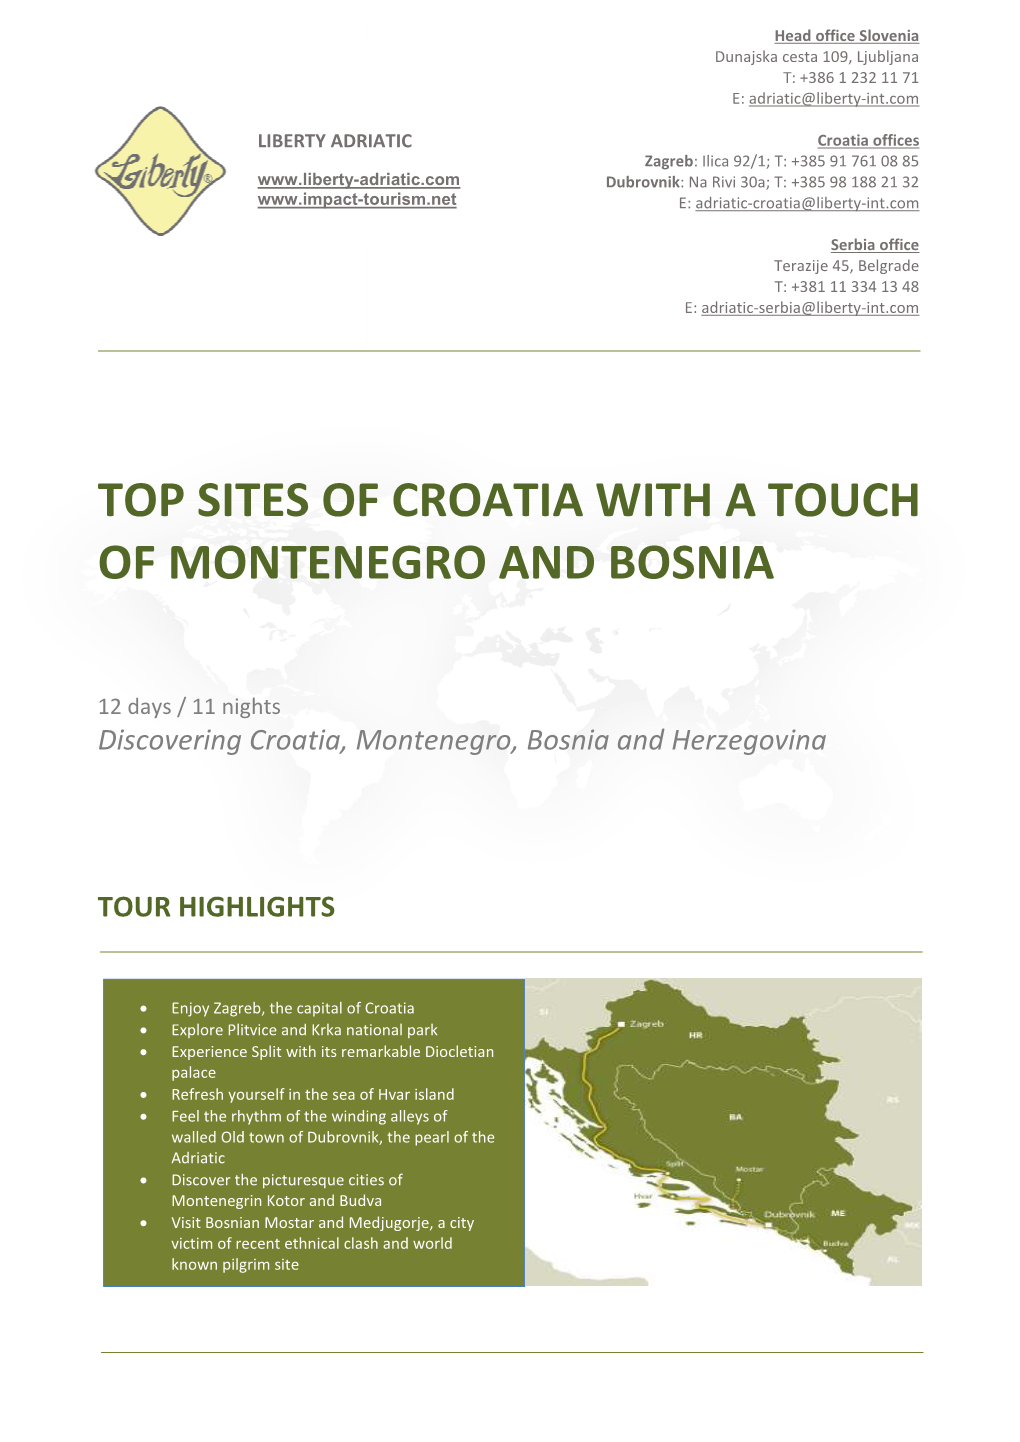 Top Sites of Croatia with a Touch of Montenegro and Bosnia